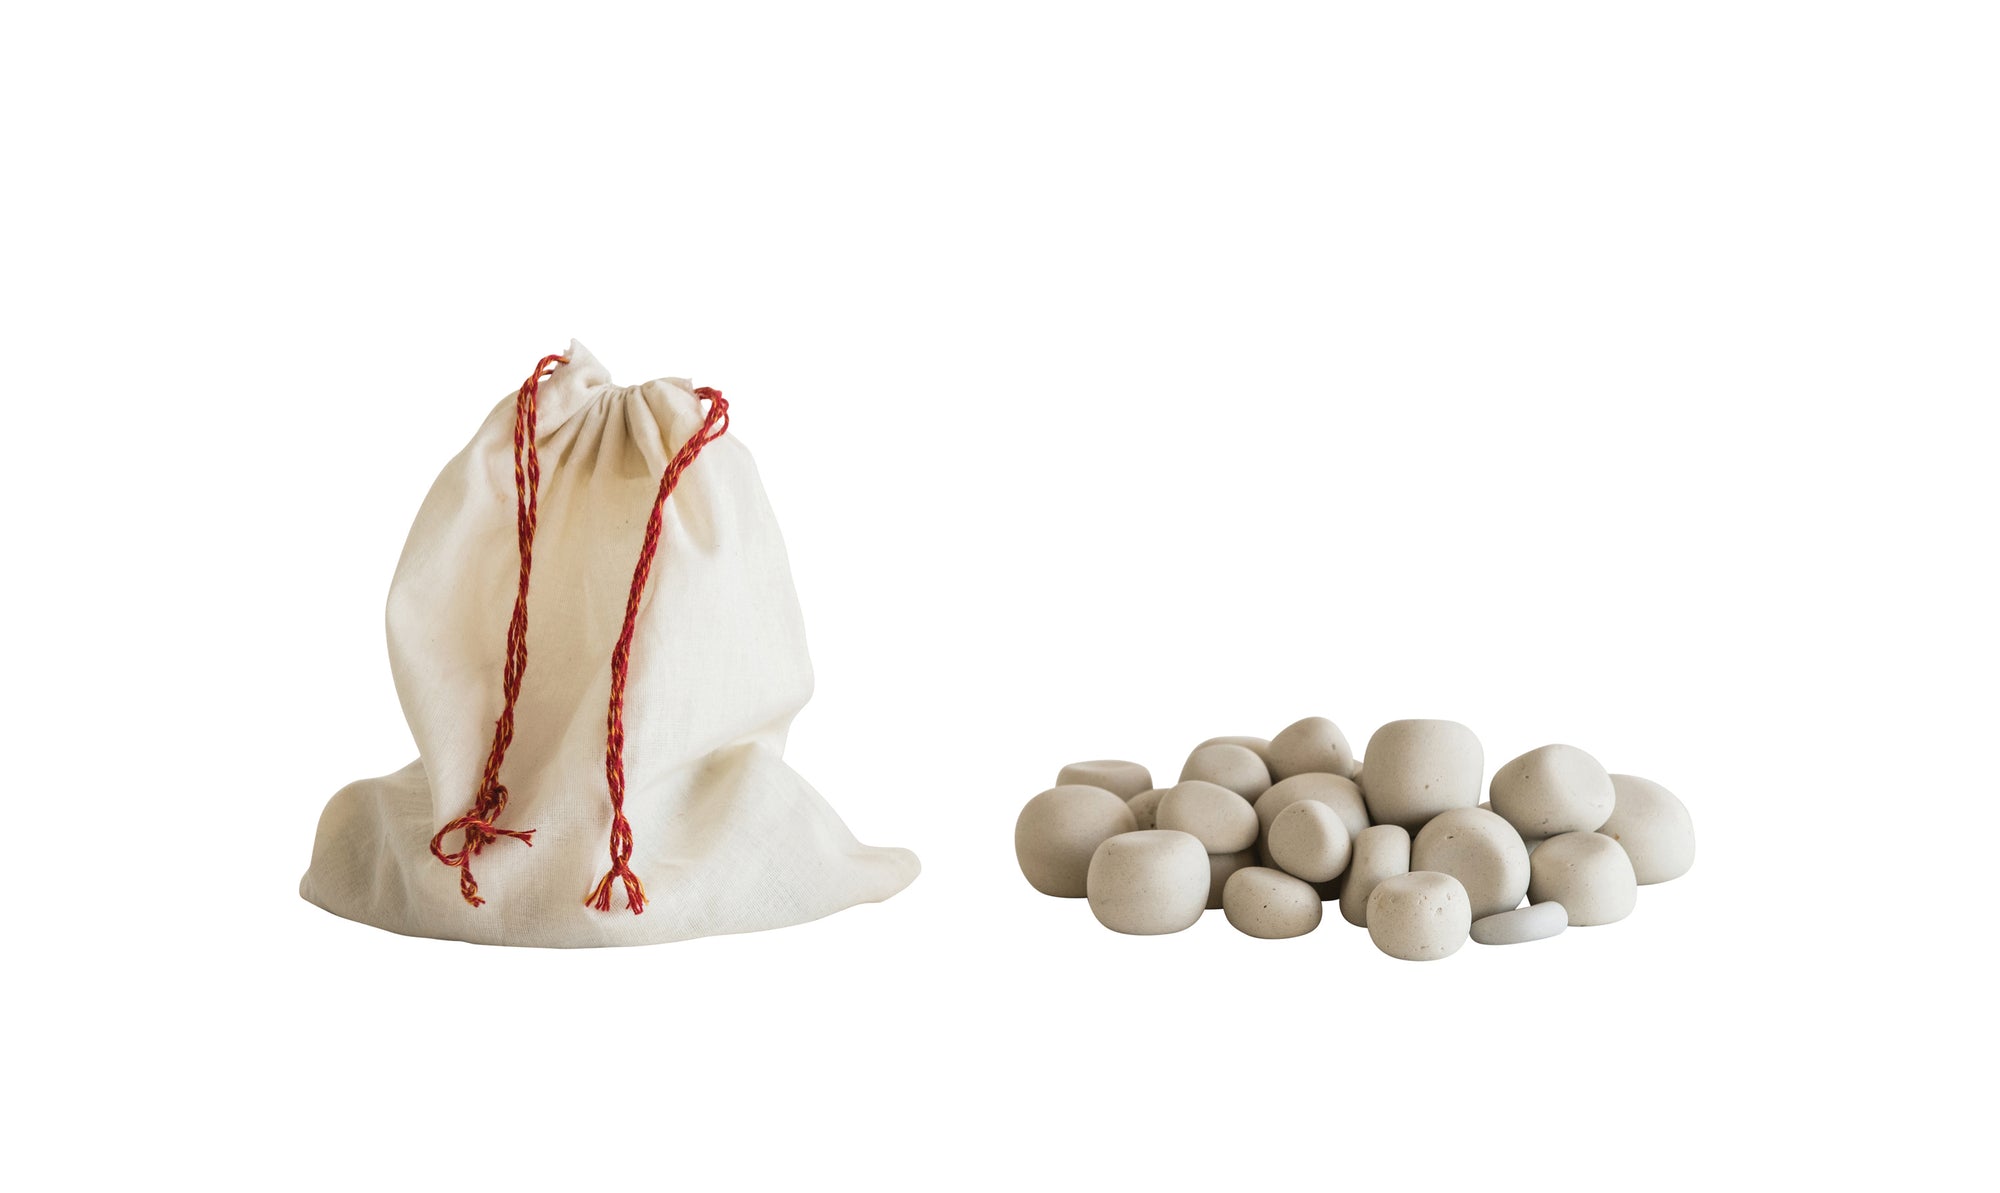 muslin bag next to small pile of stone pebbles.